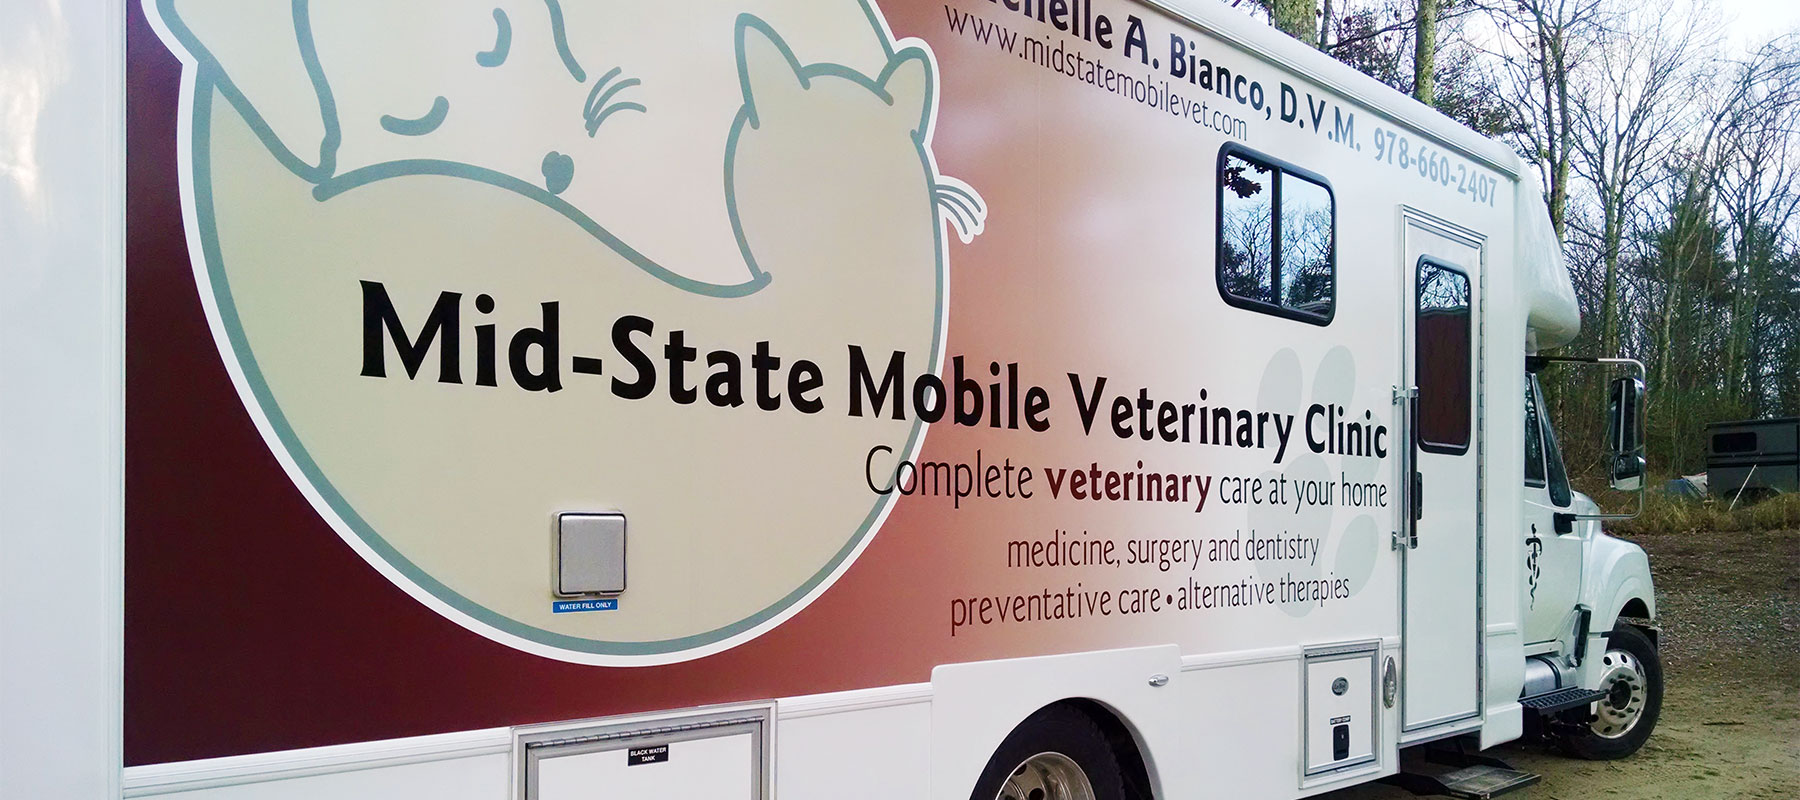 Photo of Mid-State Mobile Veterinary Clinic's Van